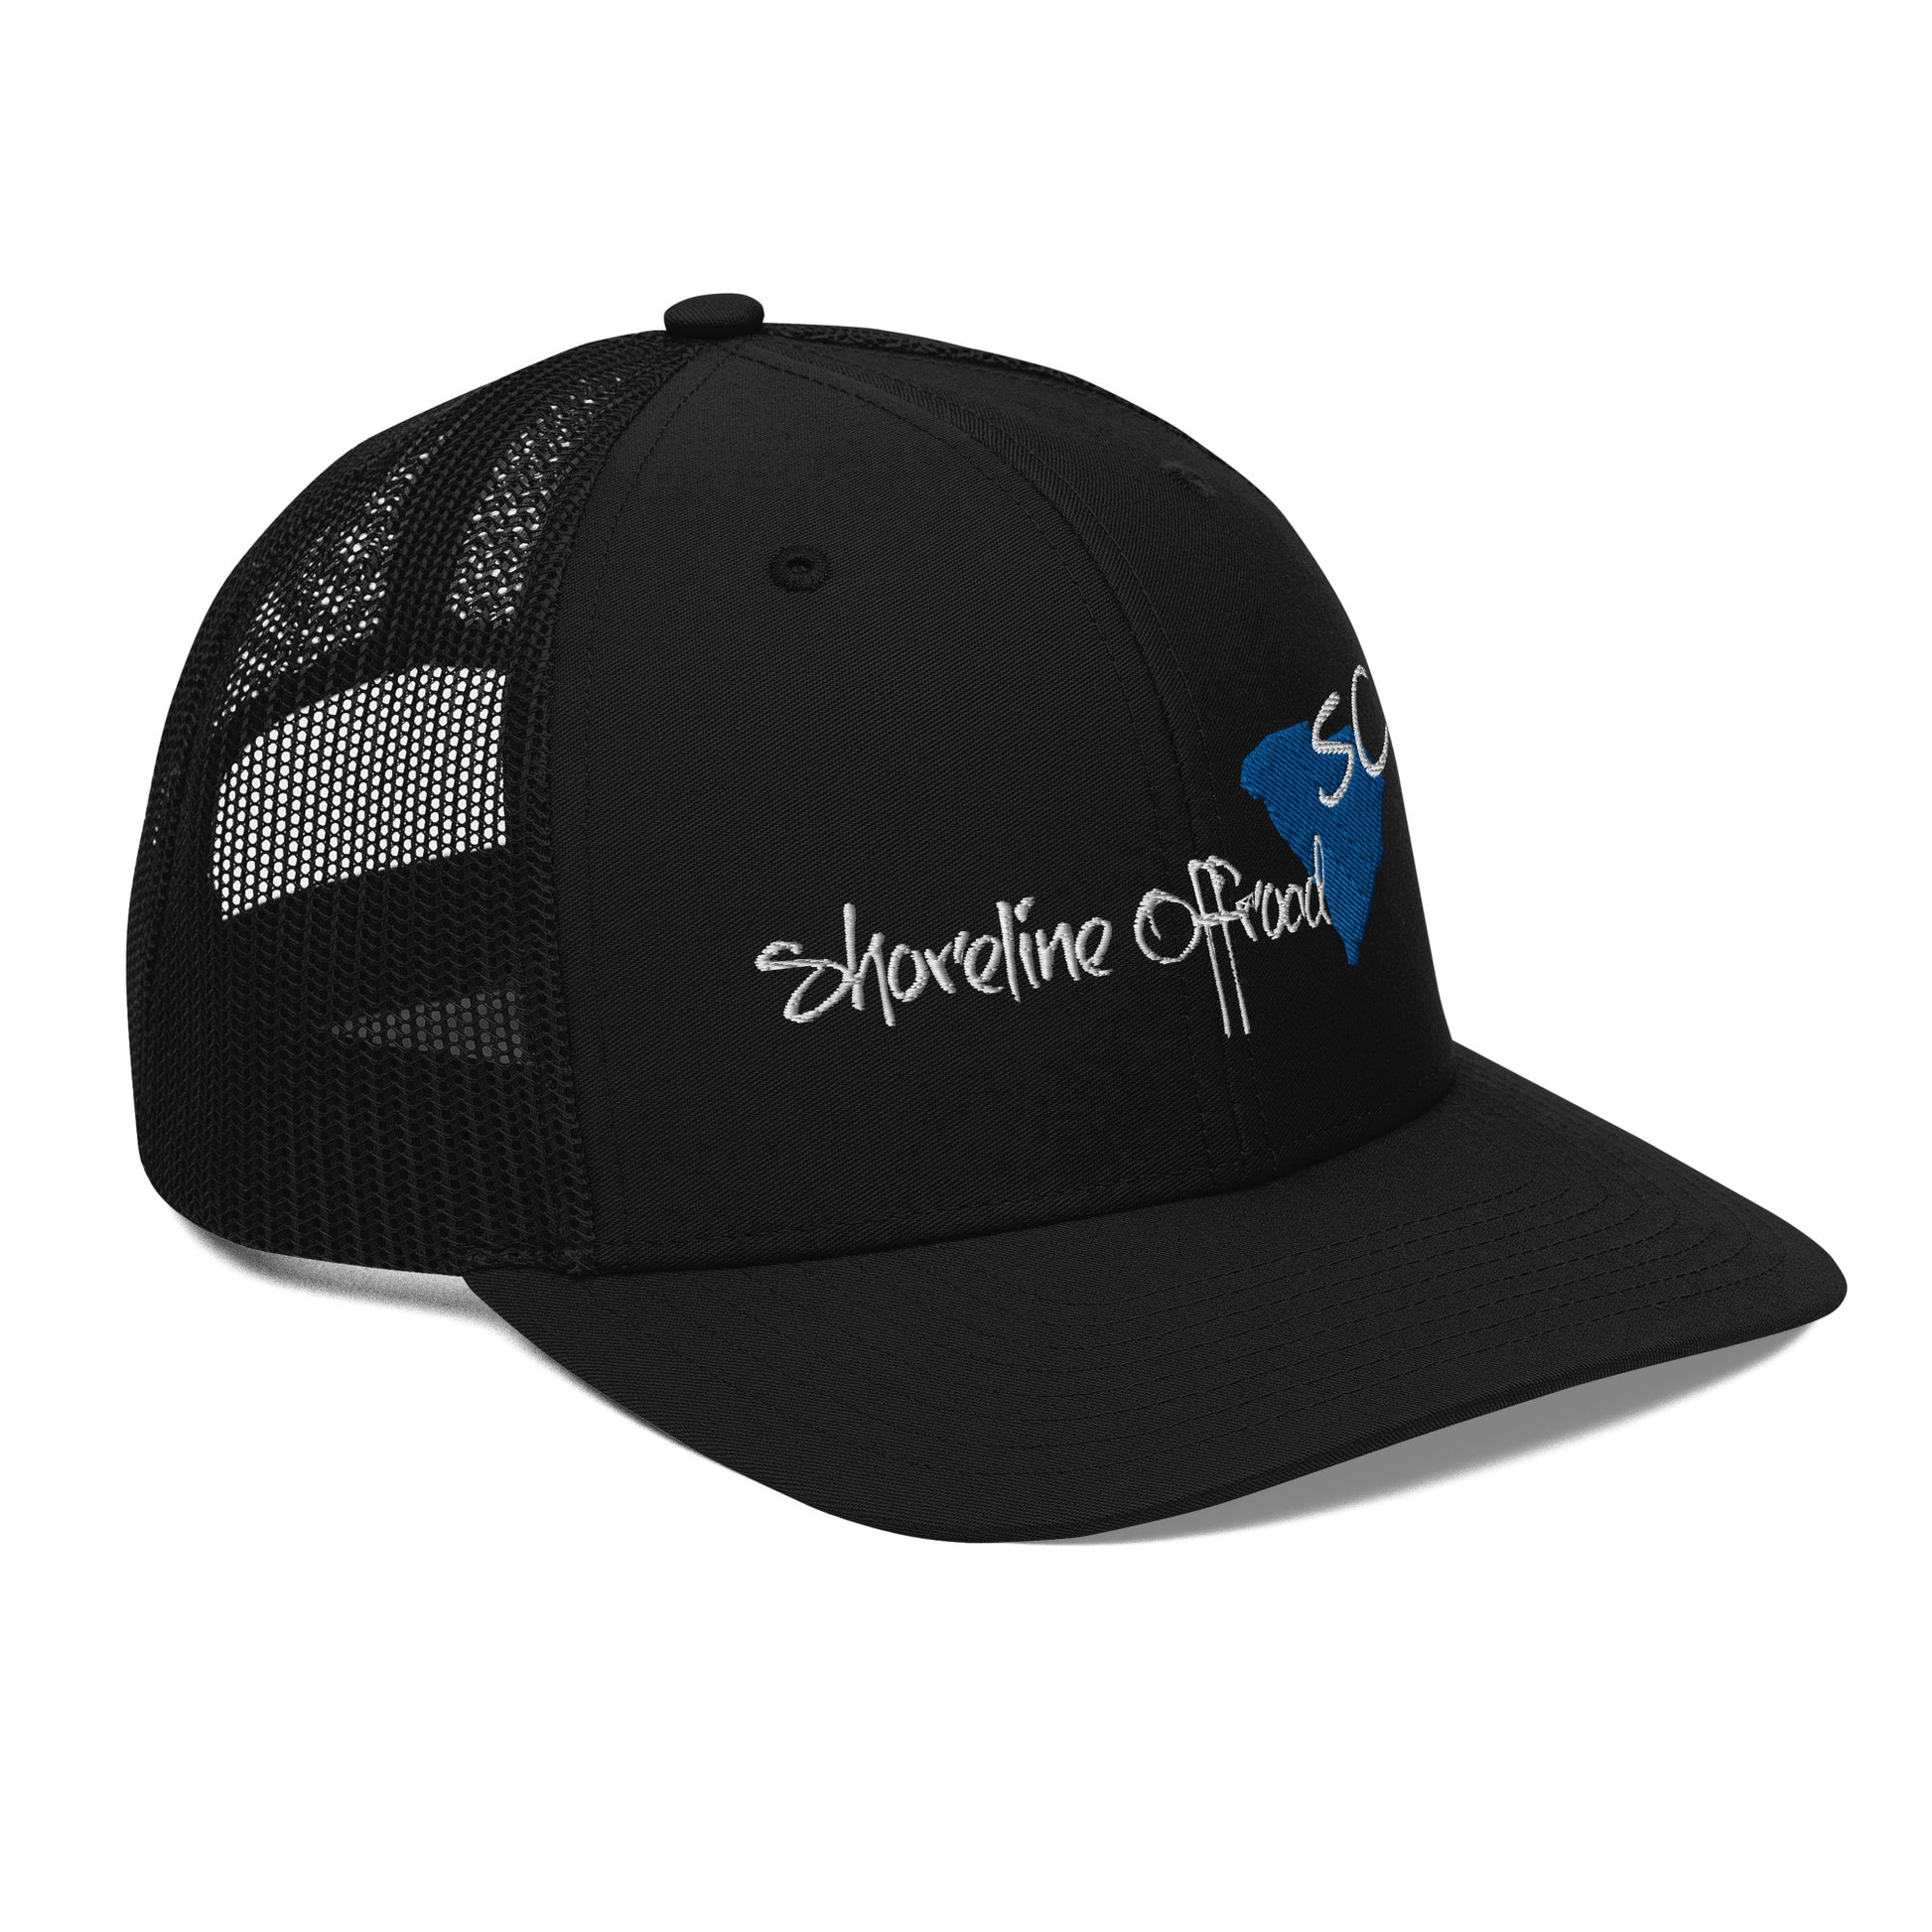 a black trucker hat with a white logo